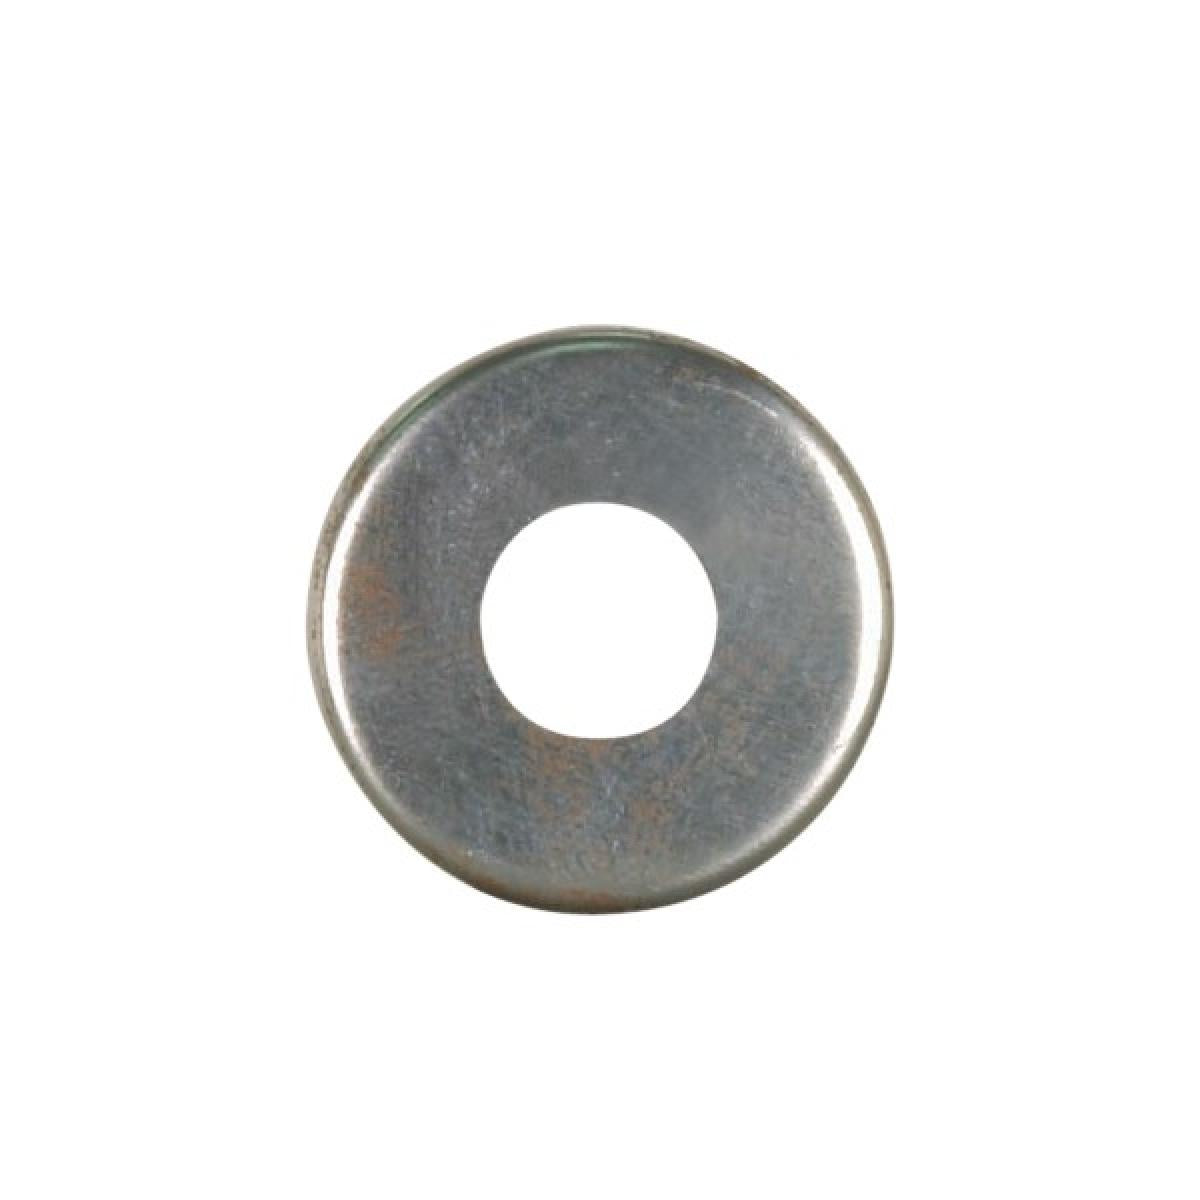 Satco 90-2059 Steel Check Ring Curled Edge 1/8 IP Slip Unfinished 1-1/4" Diameter